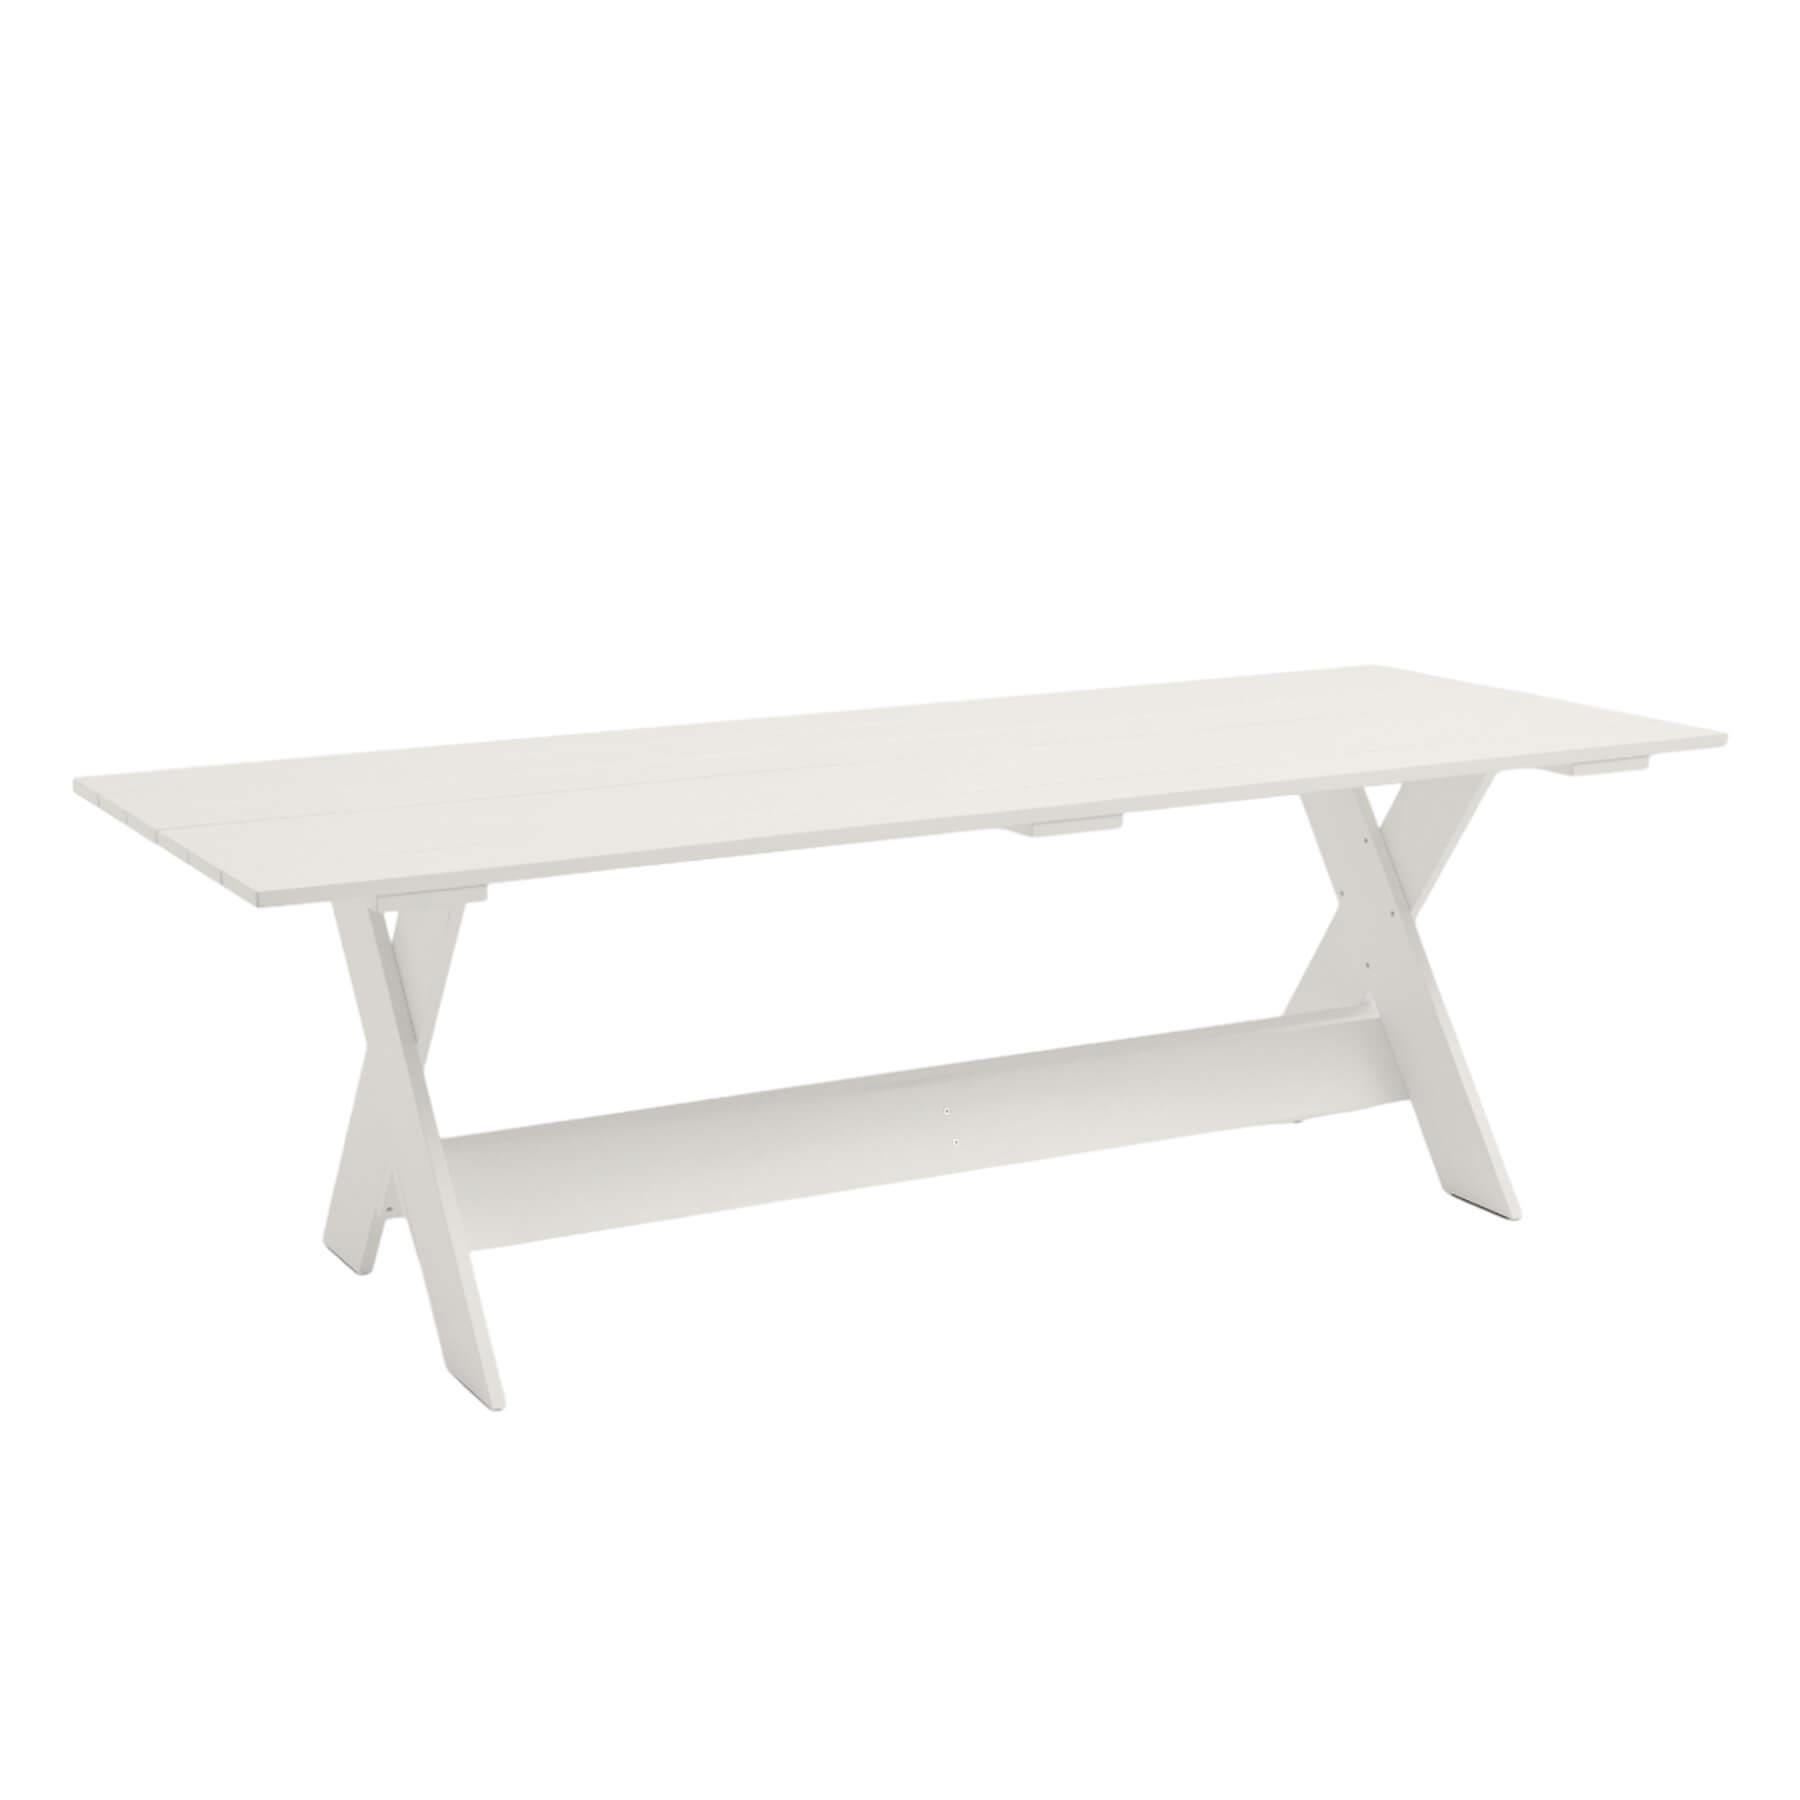 Hay Crate Dining Table 230 X 89 White Designer Furniture From Holloways Of Ludlow